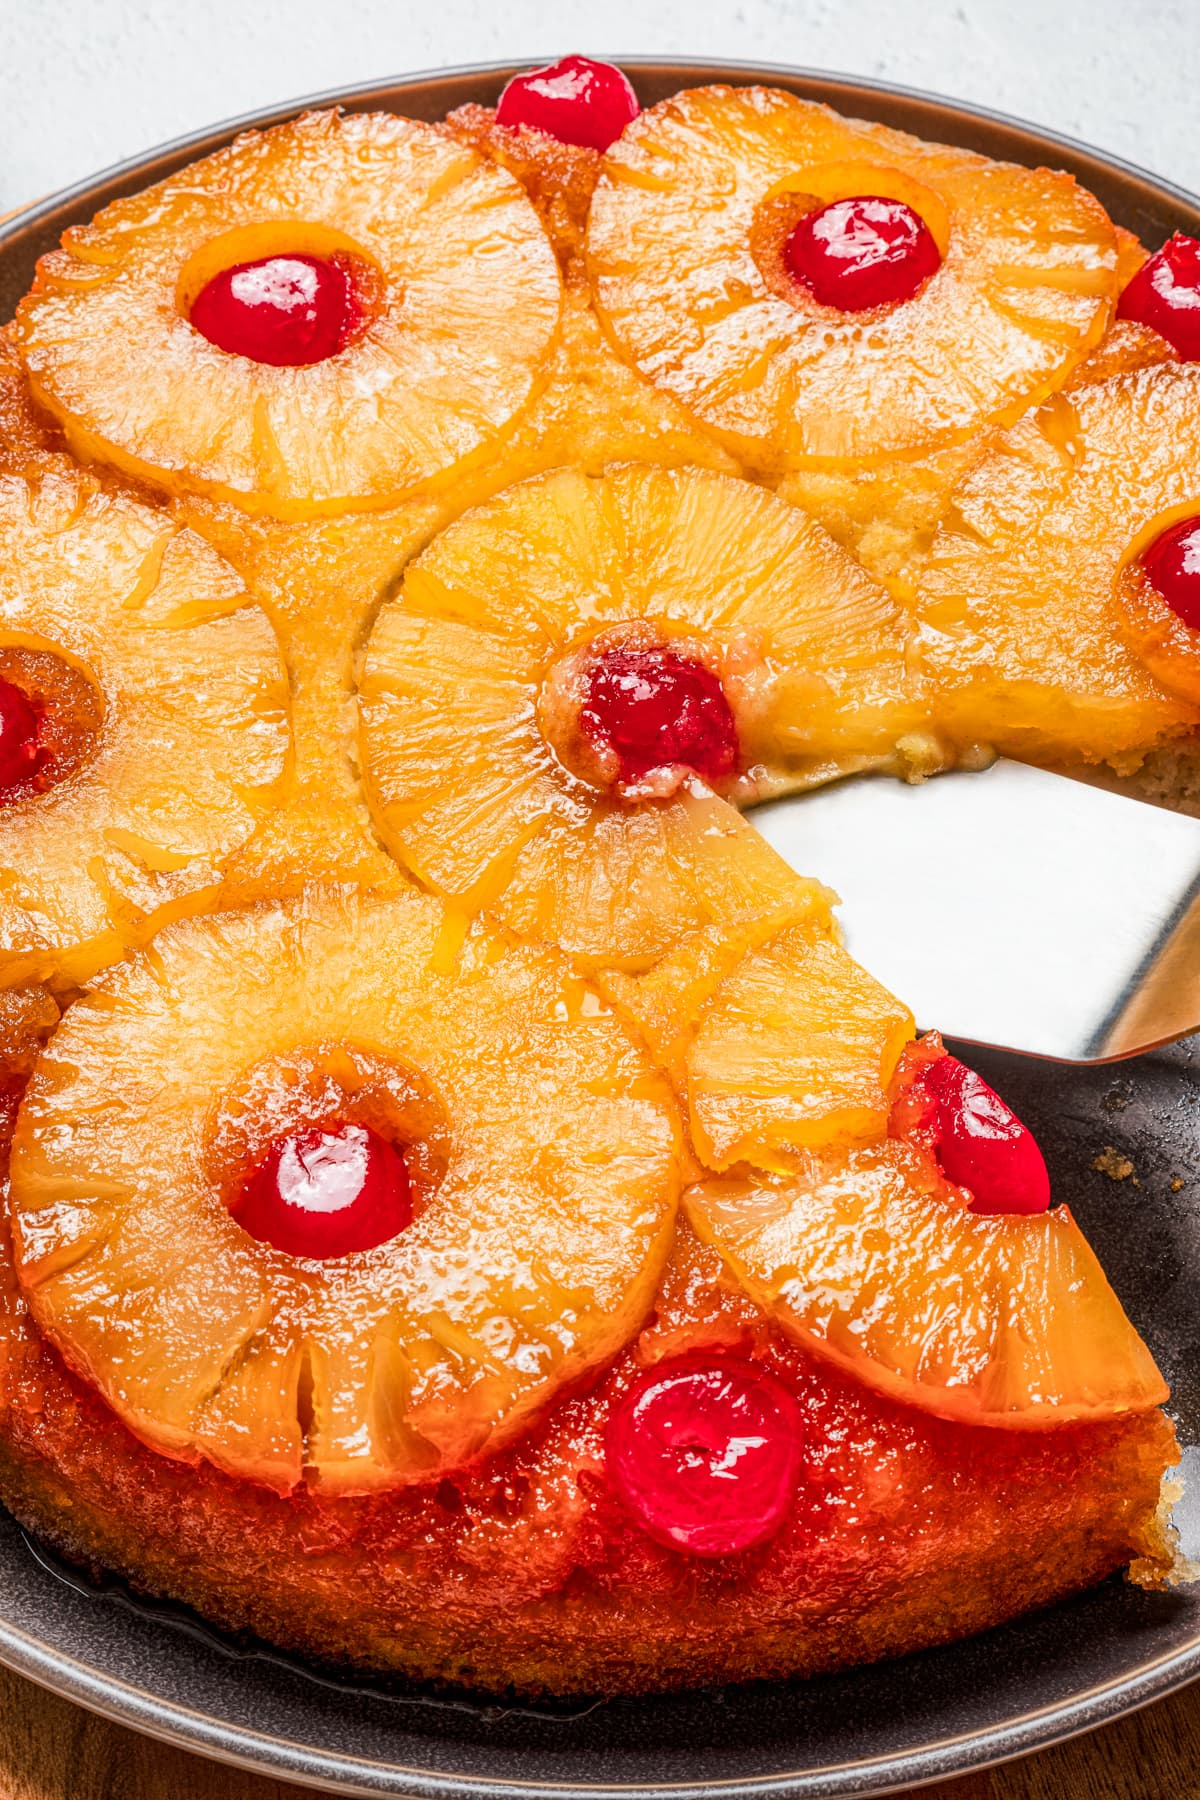 Close up of a pineapple upside down cake with a slice missing.